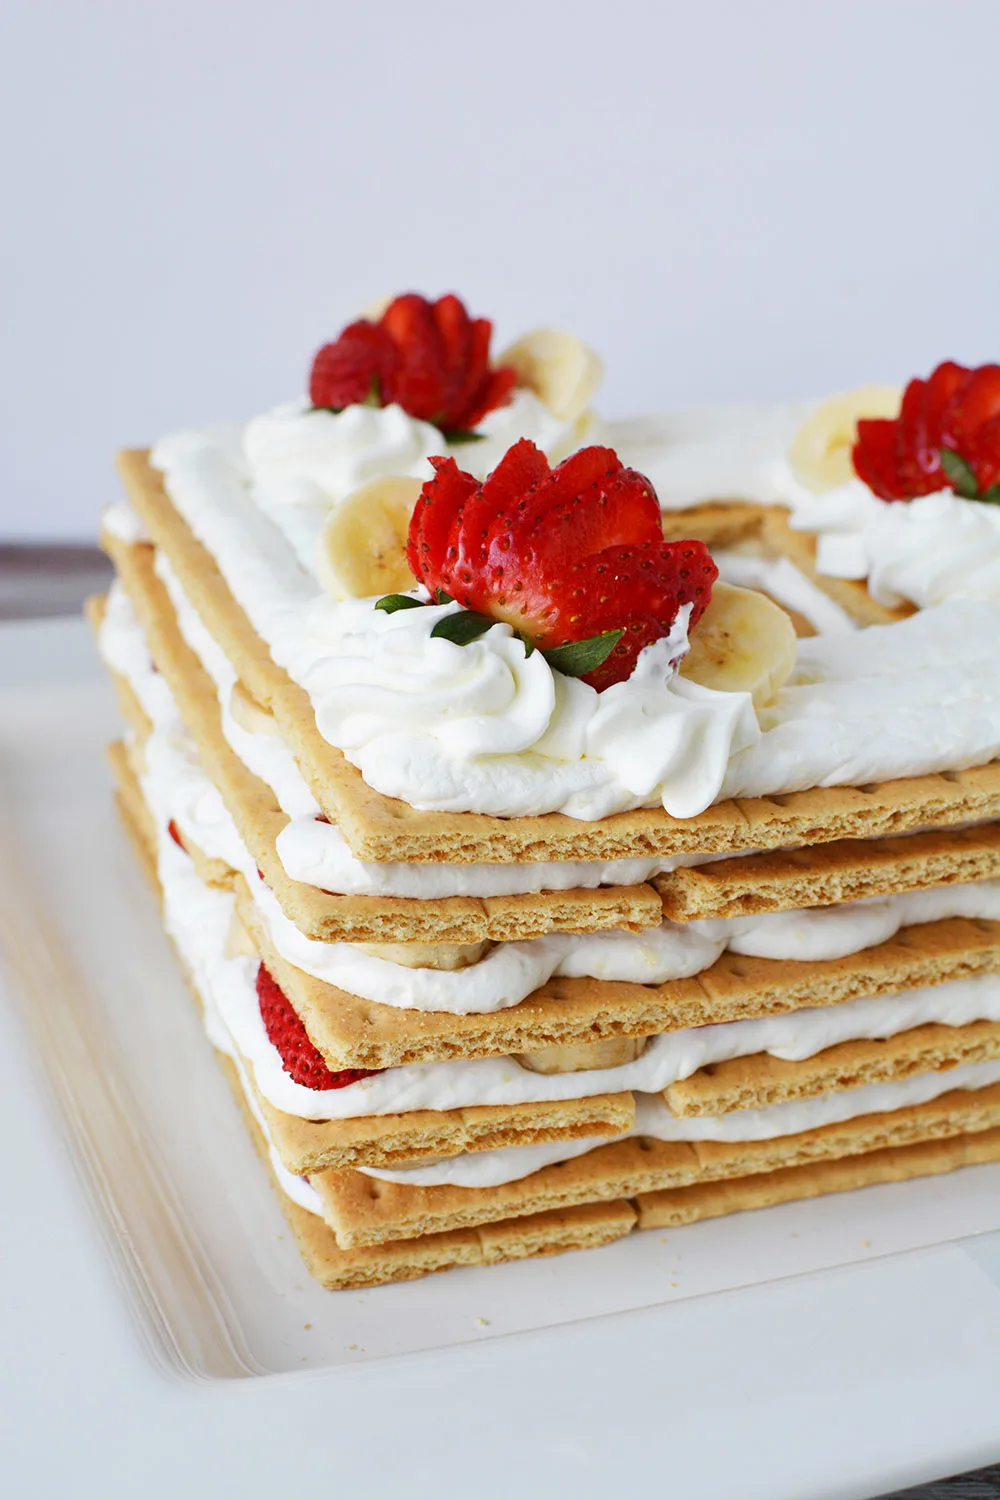 Layers of dessert into an ice box cake with strawberries.